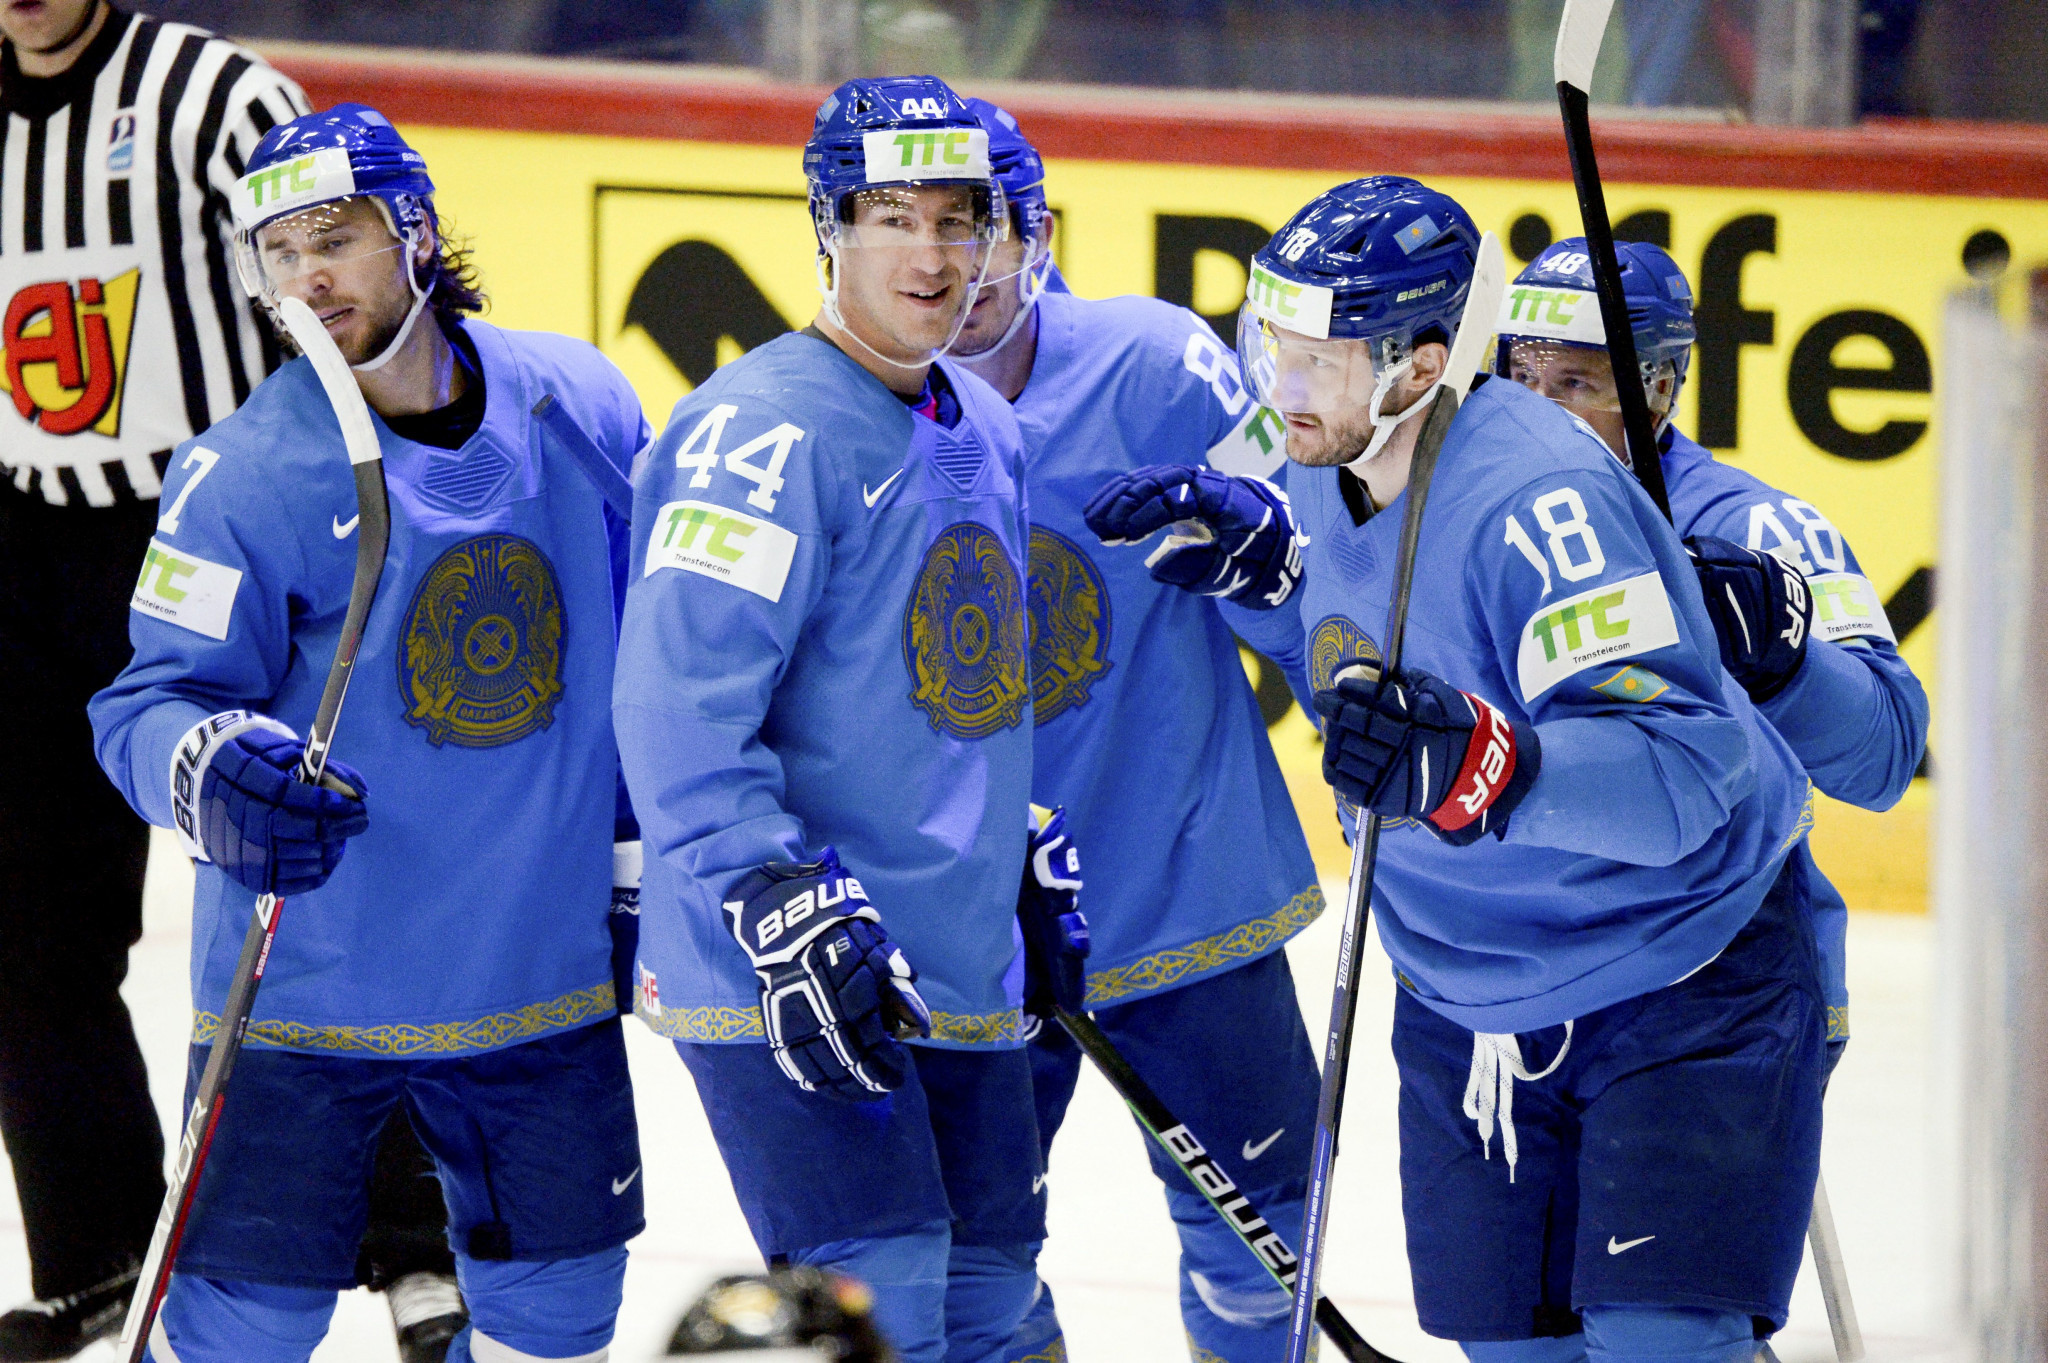 Kazakhstan is seeking to host a top-tier IIHF event for the first time ©Getty Images